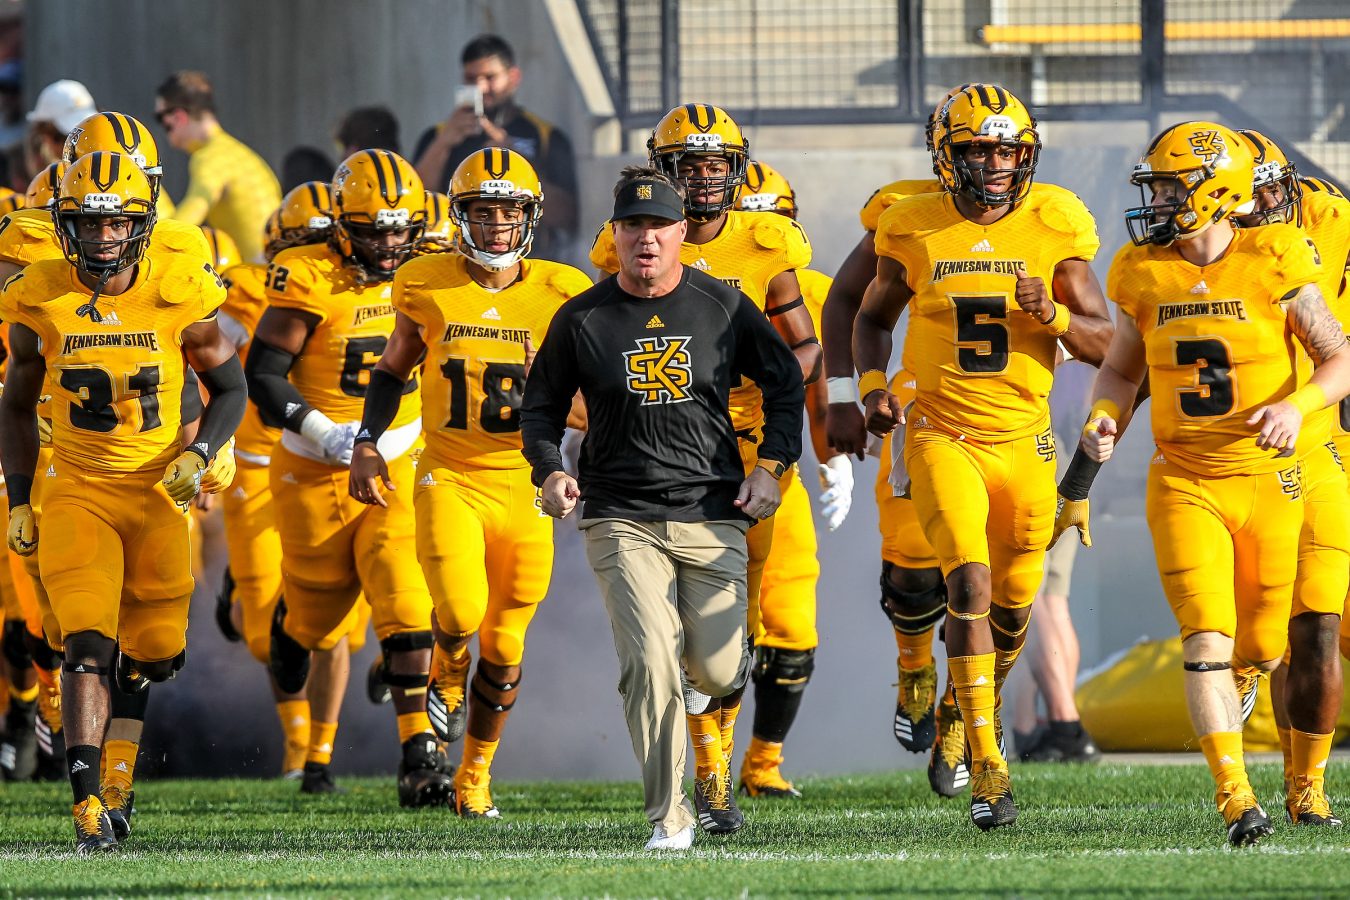 Kennesaw State To Face Cincinnati In 2022 – Fear The FCS